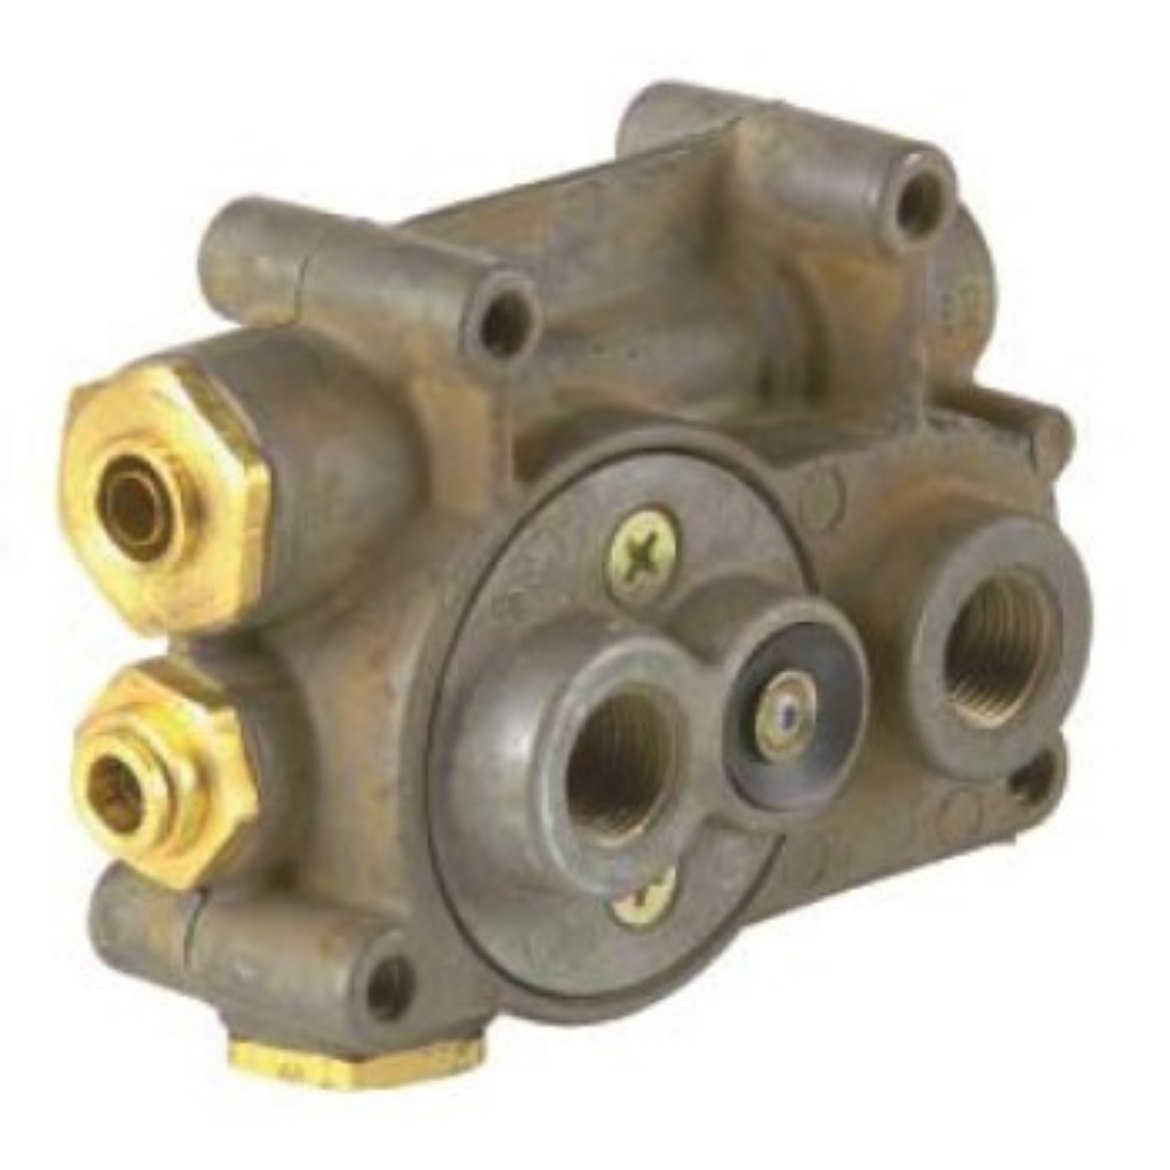 Picture of BRAKE CONTROL VALVE TP5 - TRACTOR PROTECTION VALVE